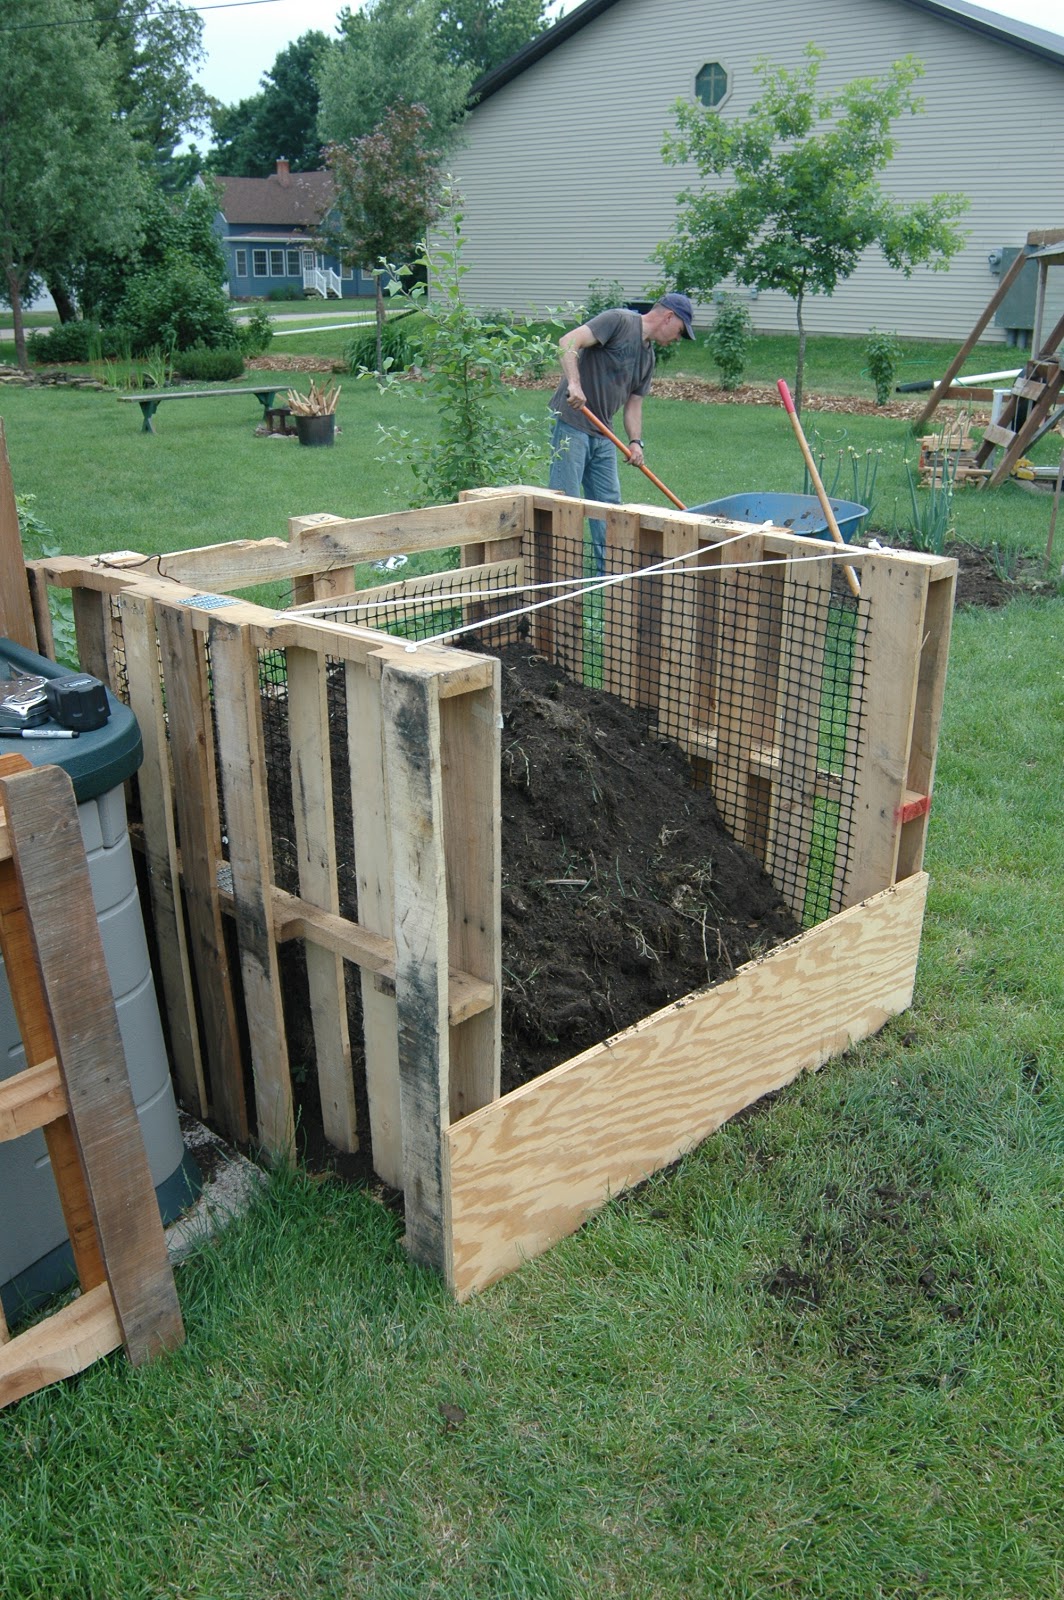 shallow thoughts from iowa: new compost bins made out of